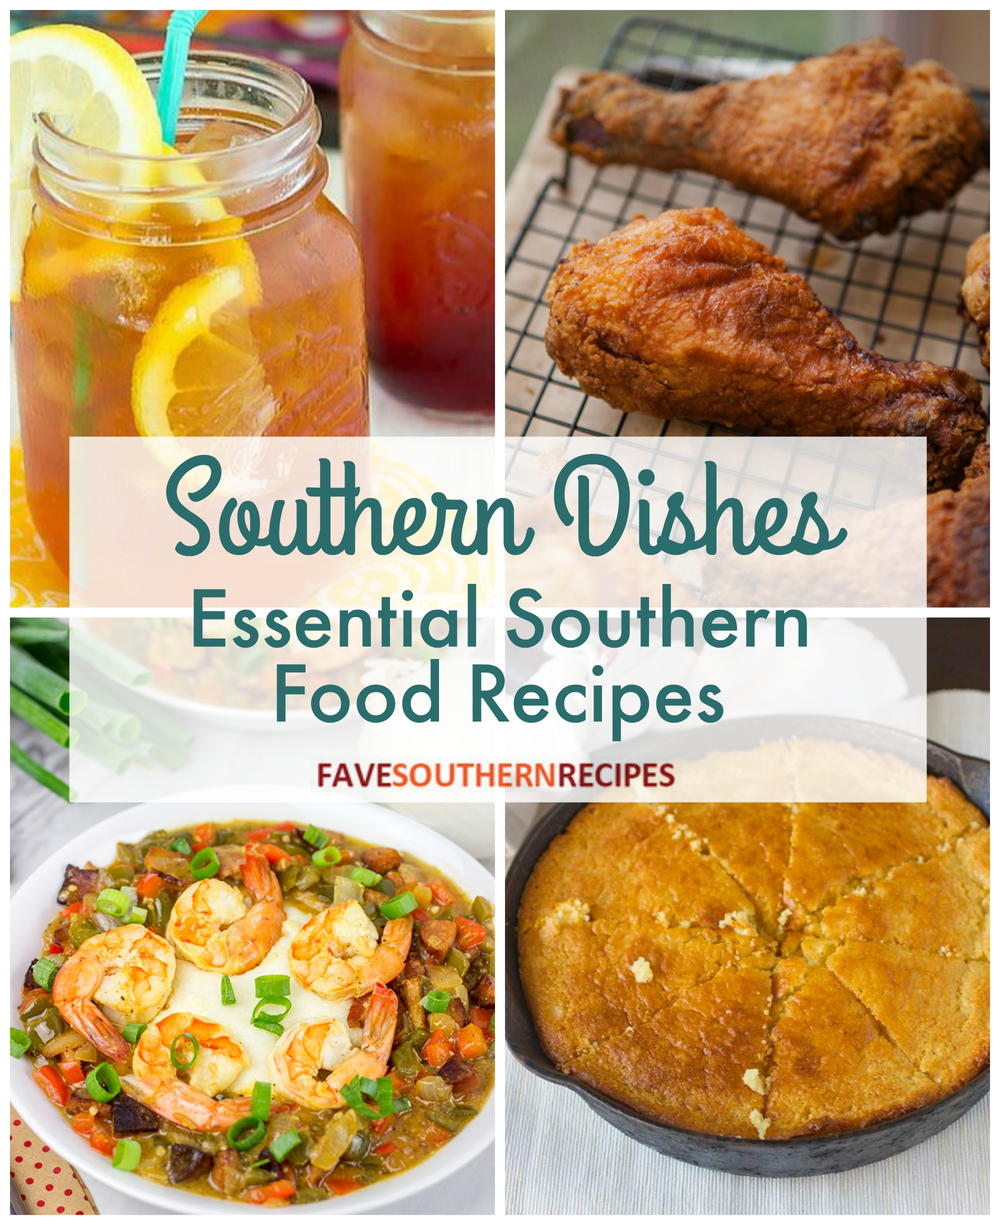 What are some common southern dishes?